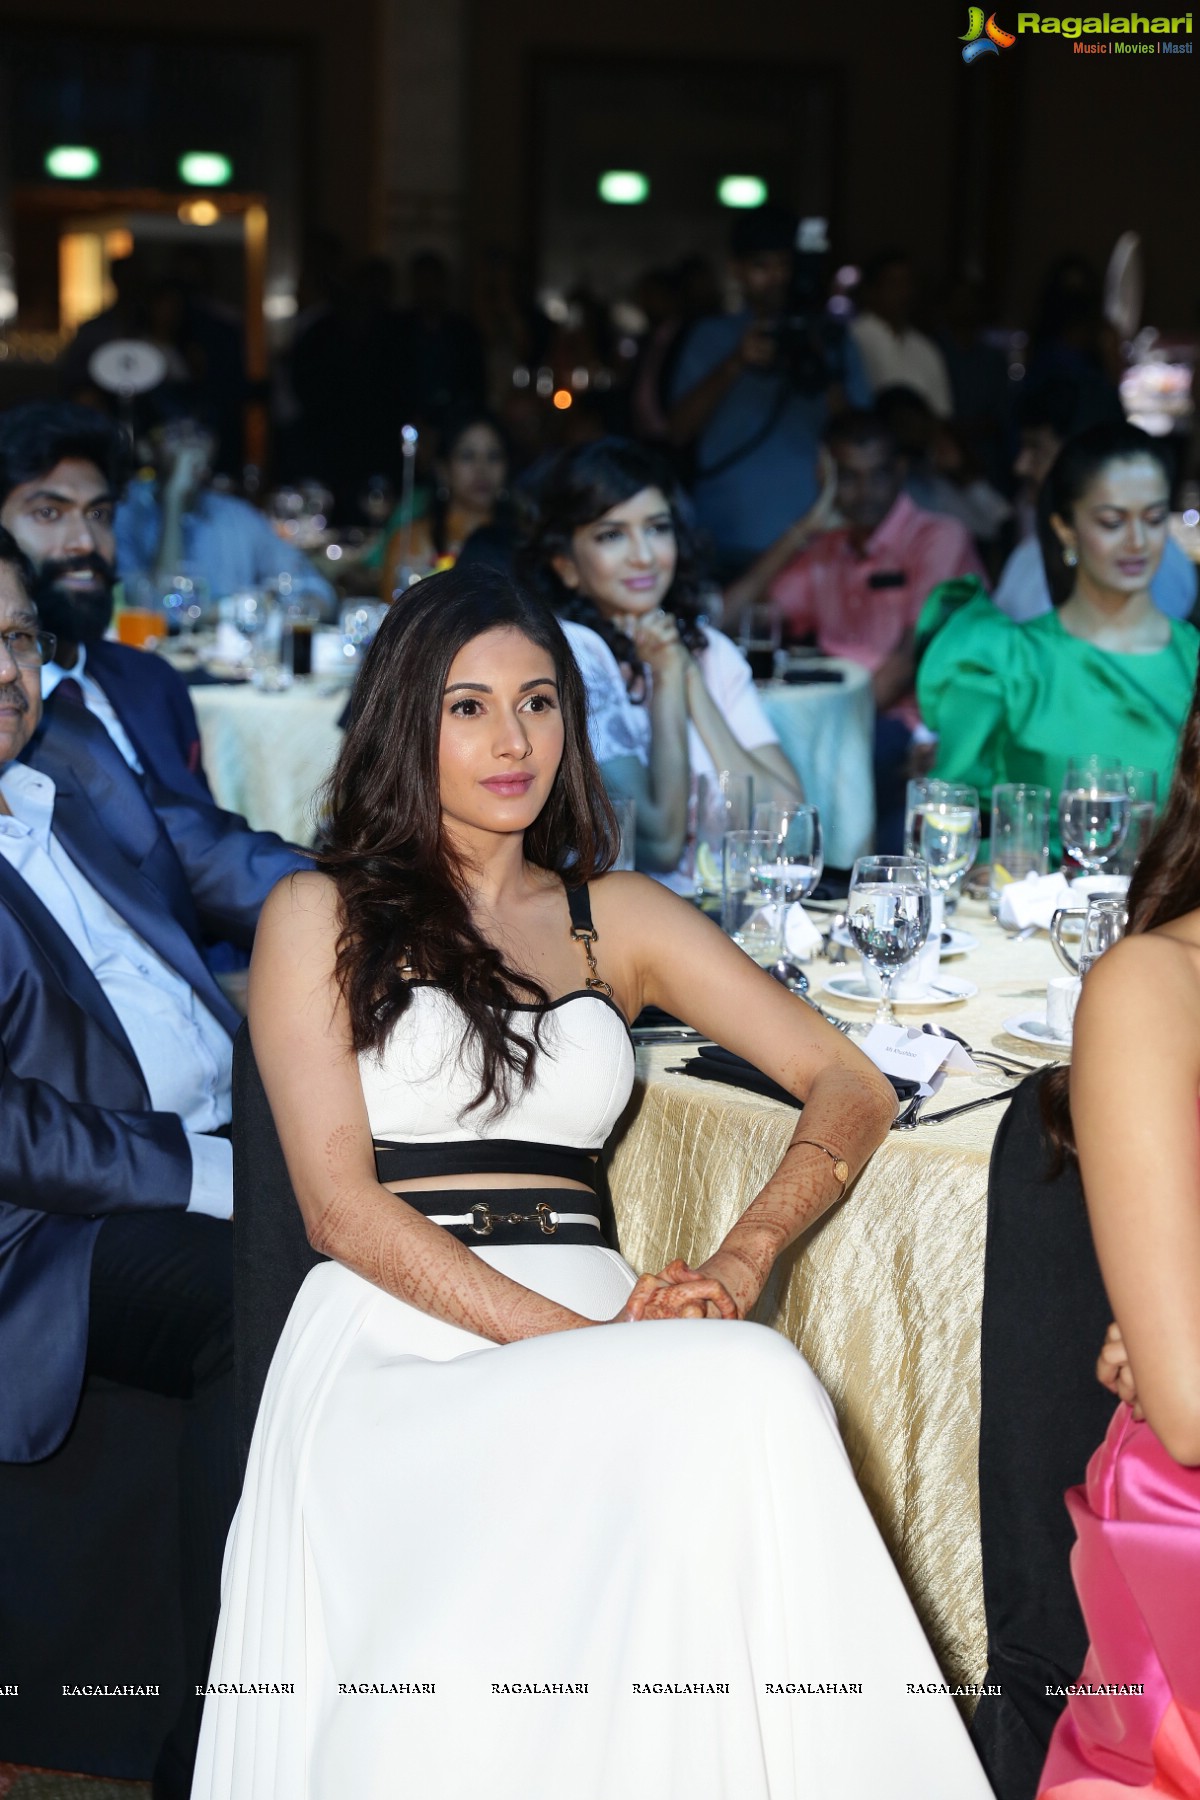 The South Indian Business Achievers Awards 2016, Singapore